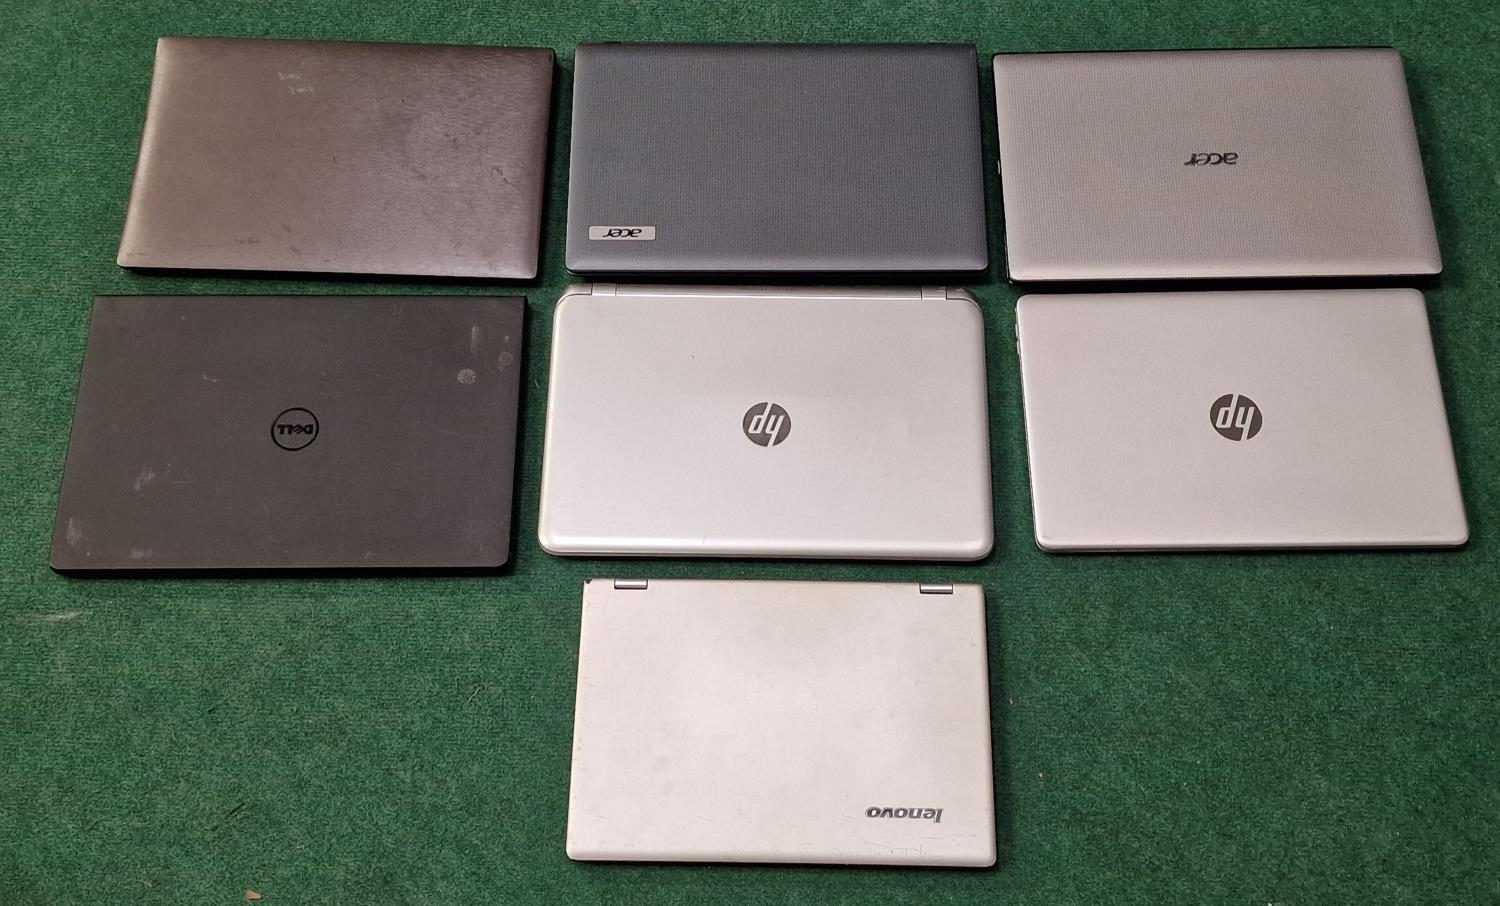 Collection of 7 laptop computers to include - Notebook W550SU - Acer Aspire 5741 and 5733 - Dell